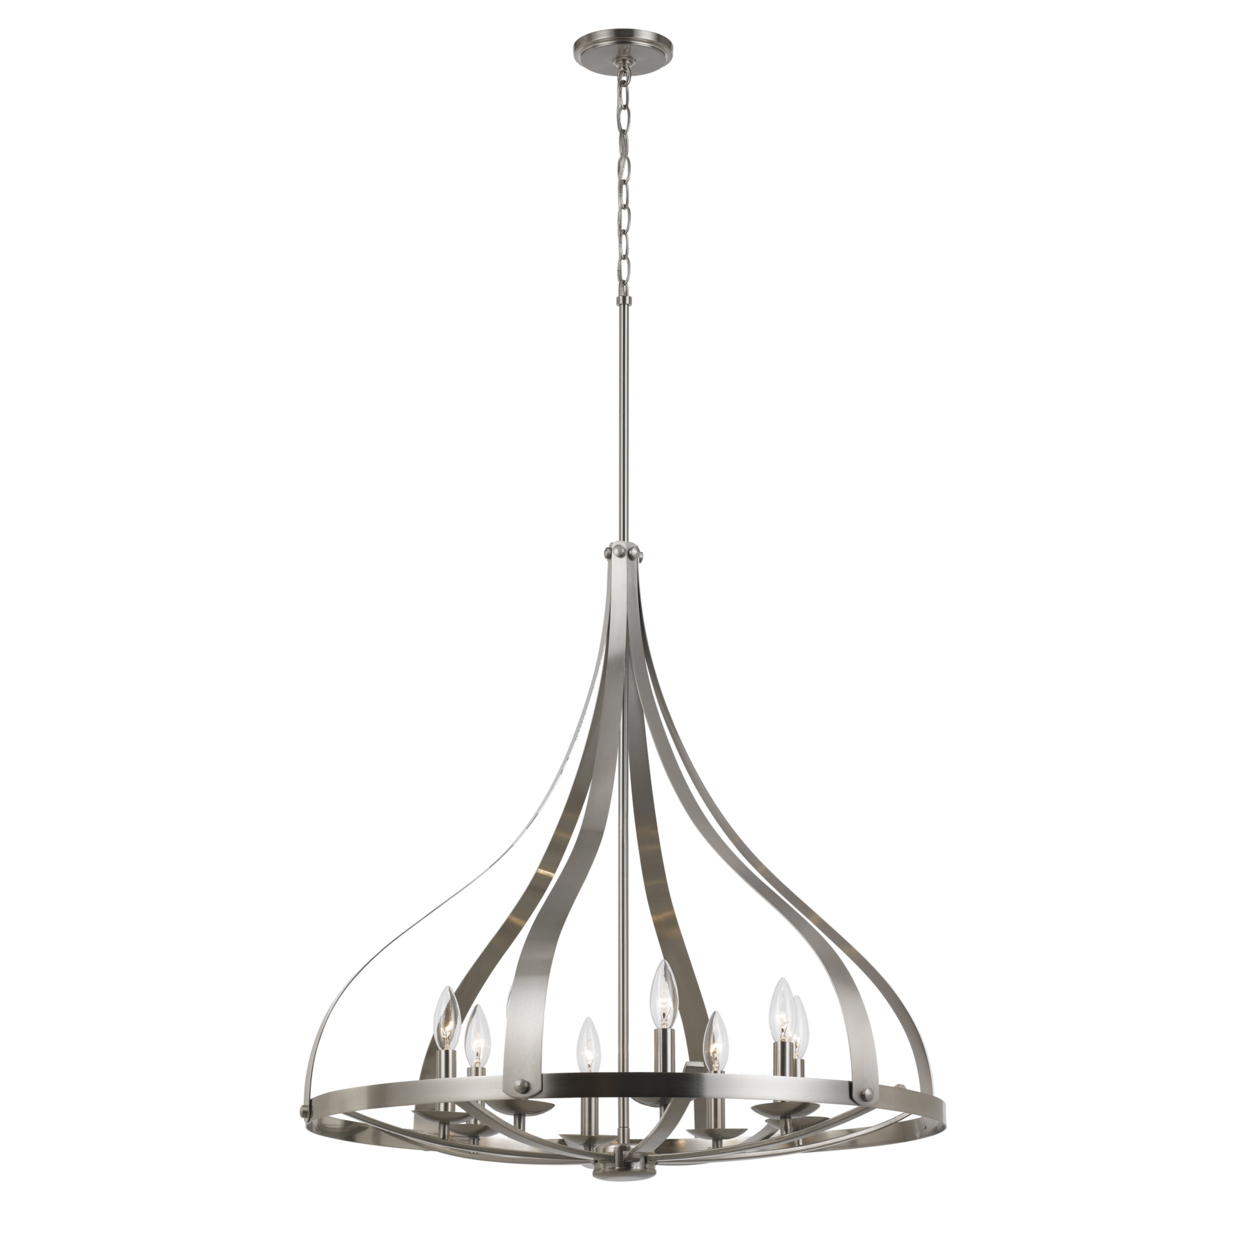 8 Bulb Chandelier With Round Metal Frame And Candle Style Lights, Silver- Saltoro Sherpi